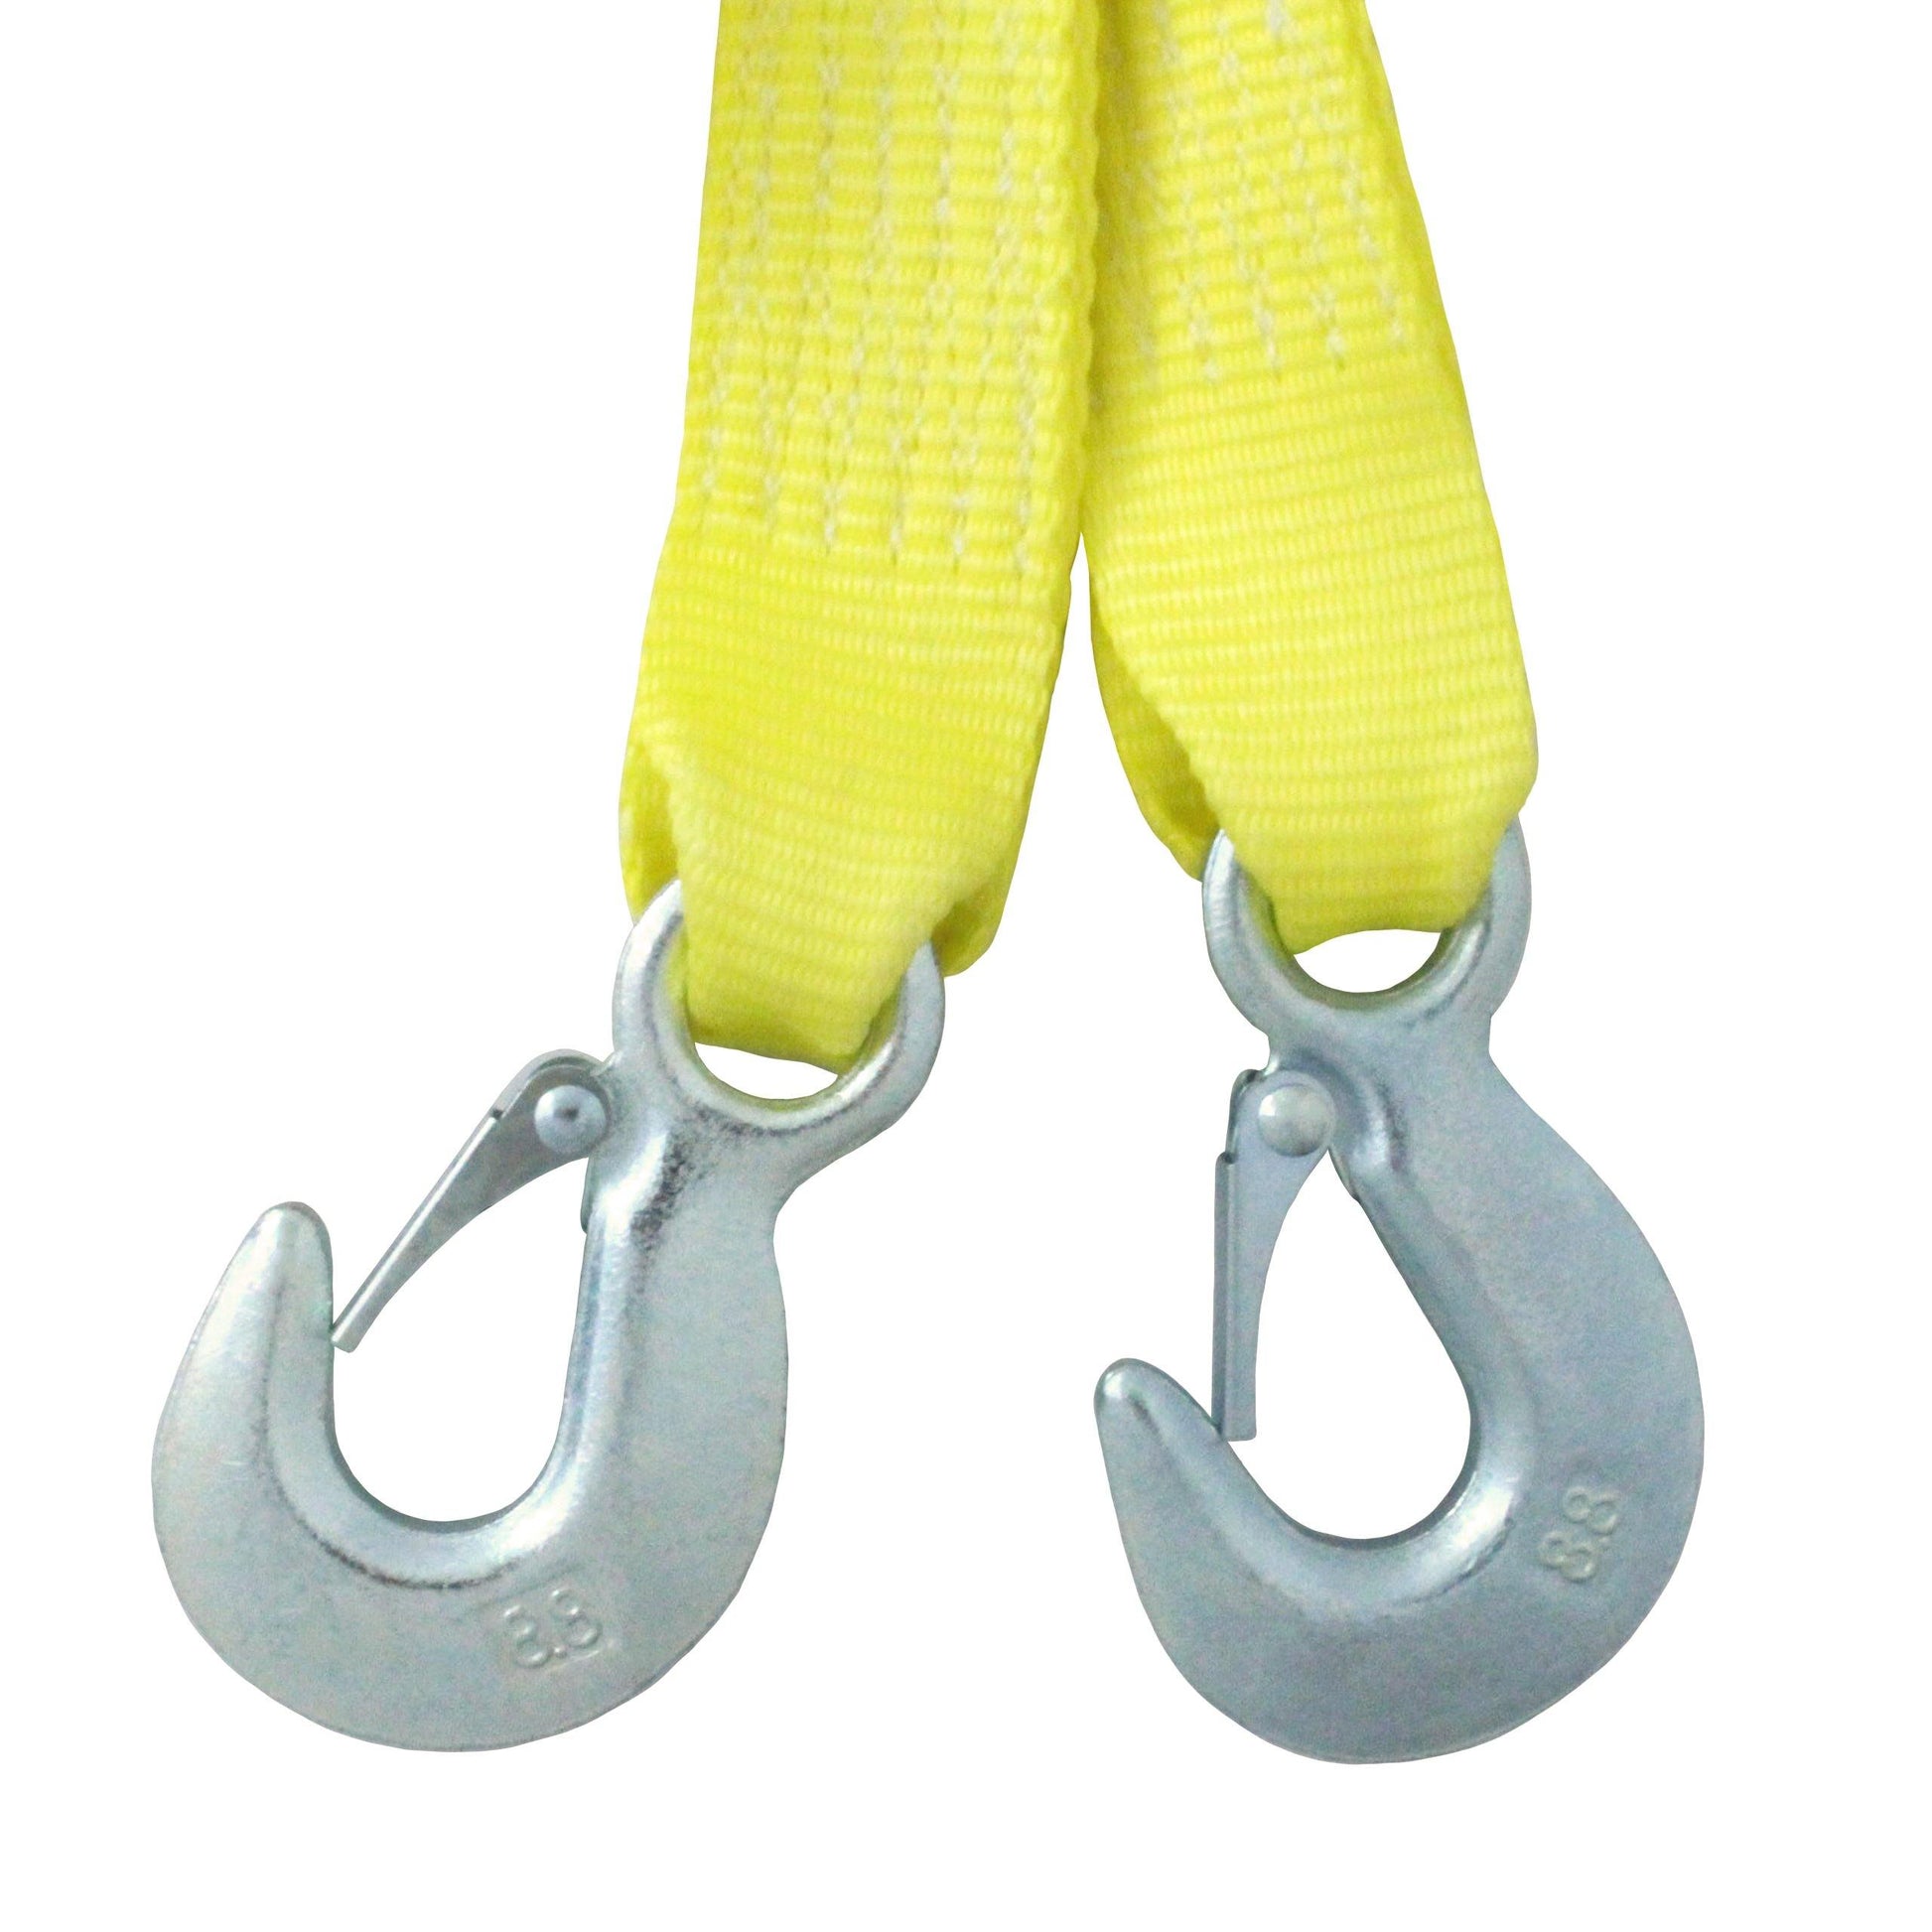 1-3/4 Inch Tow Strap with Safety Hooks - Boxer Tools